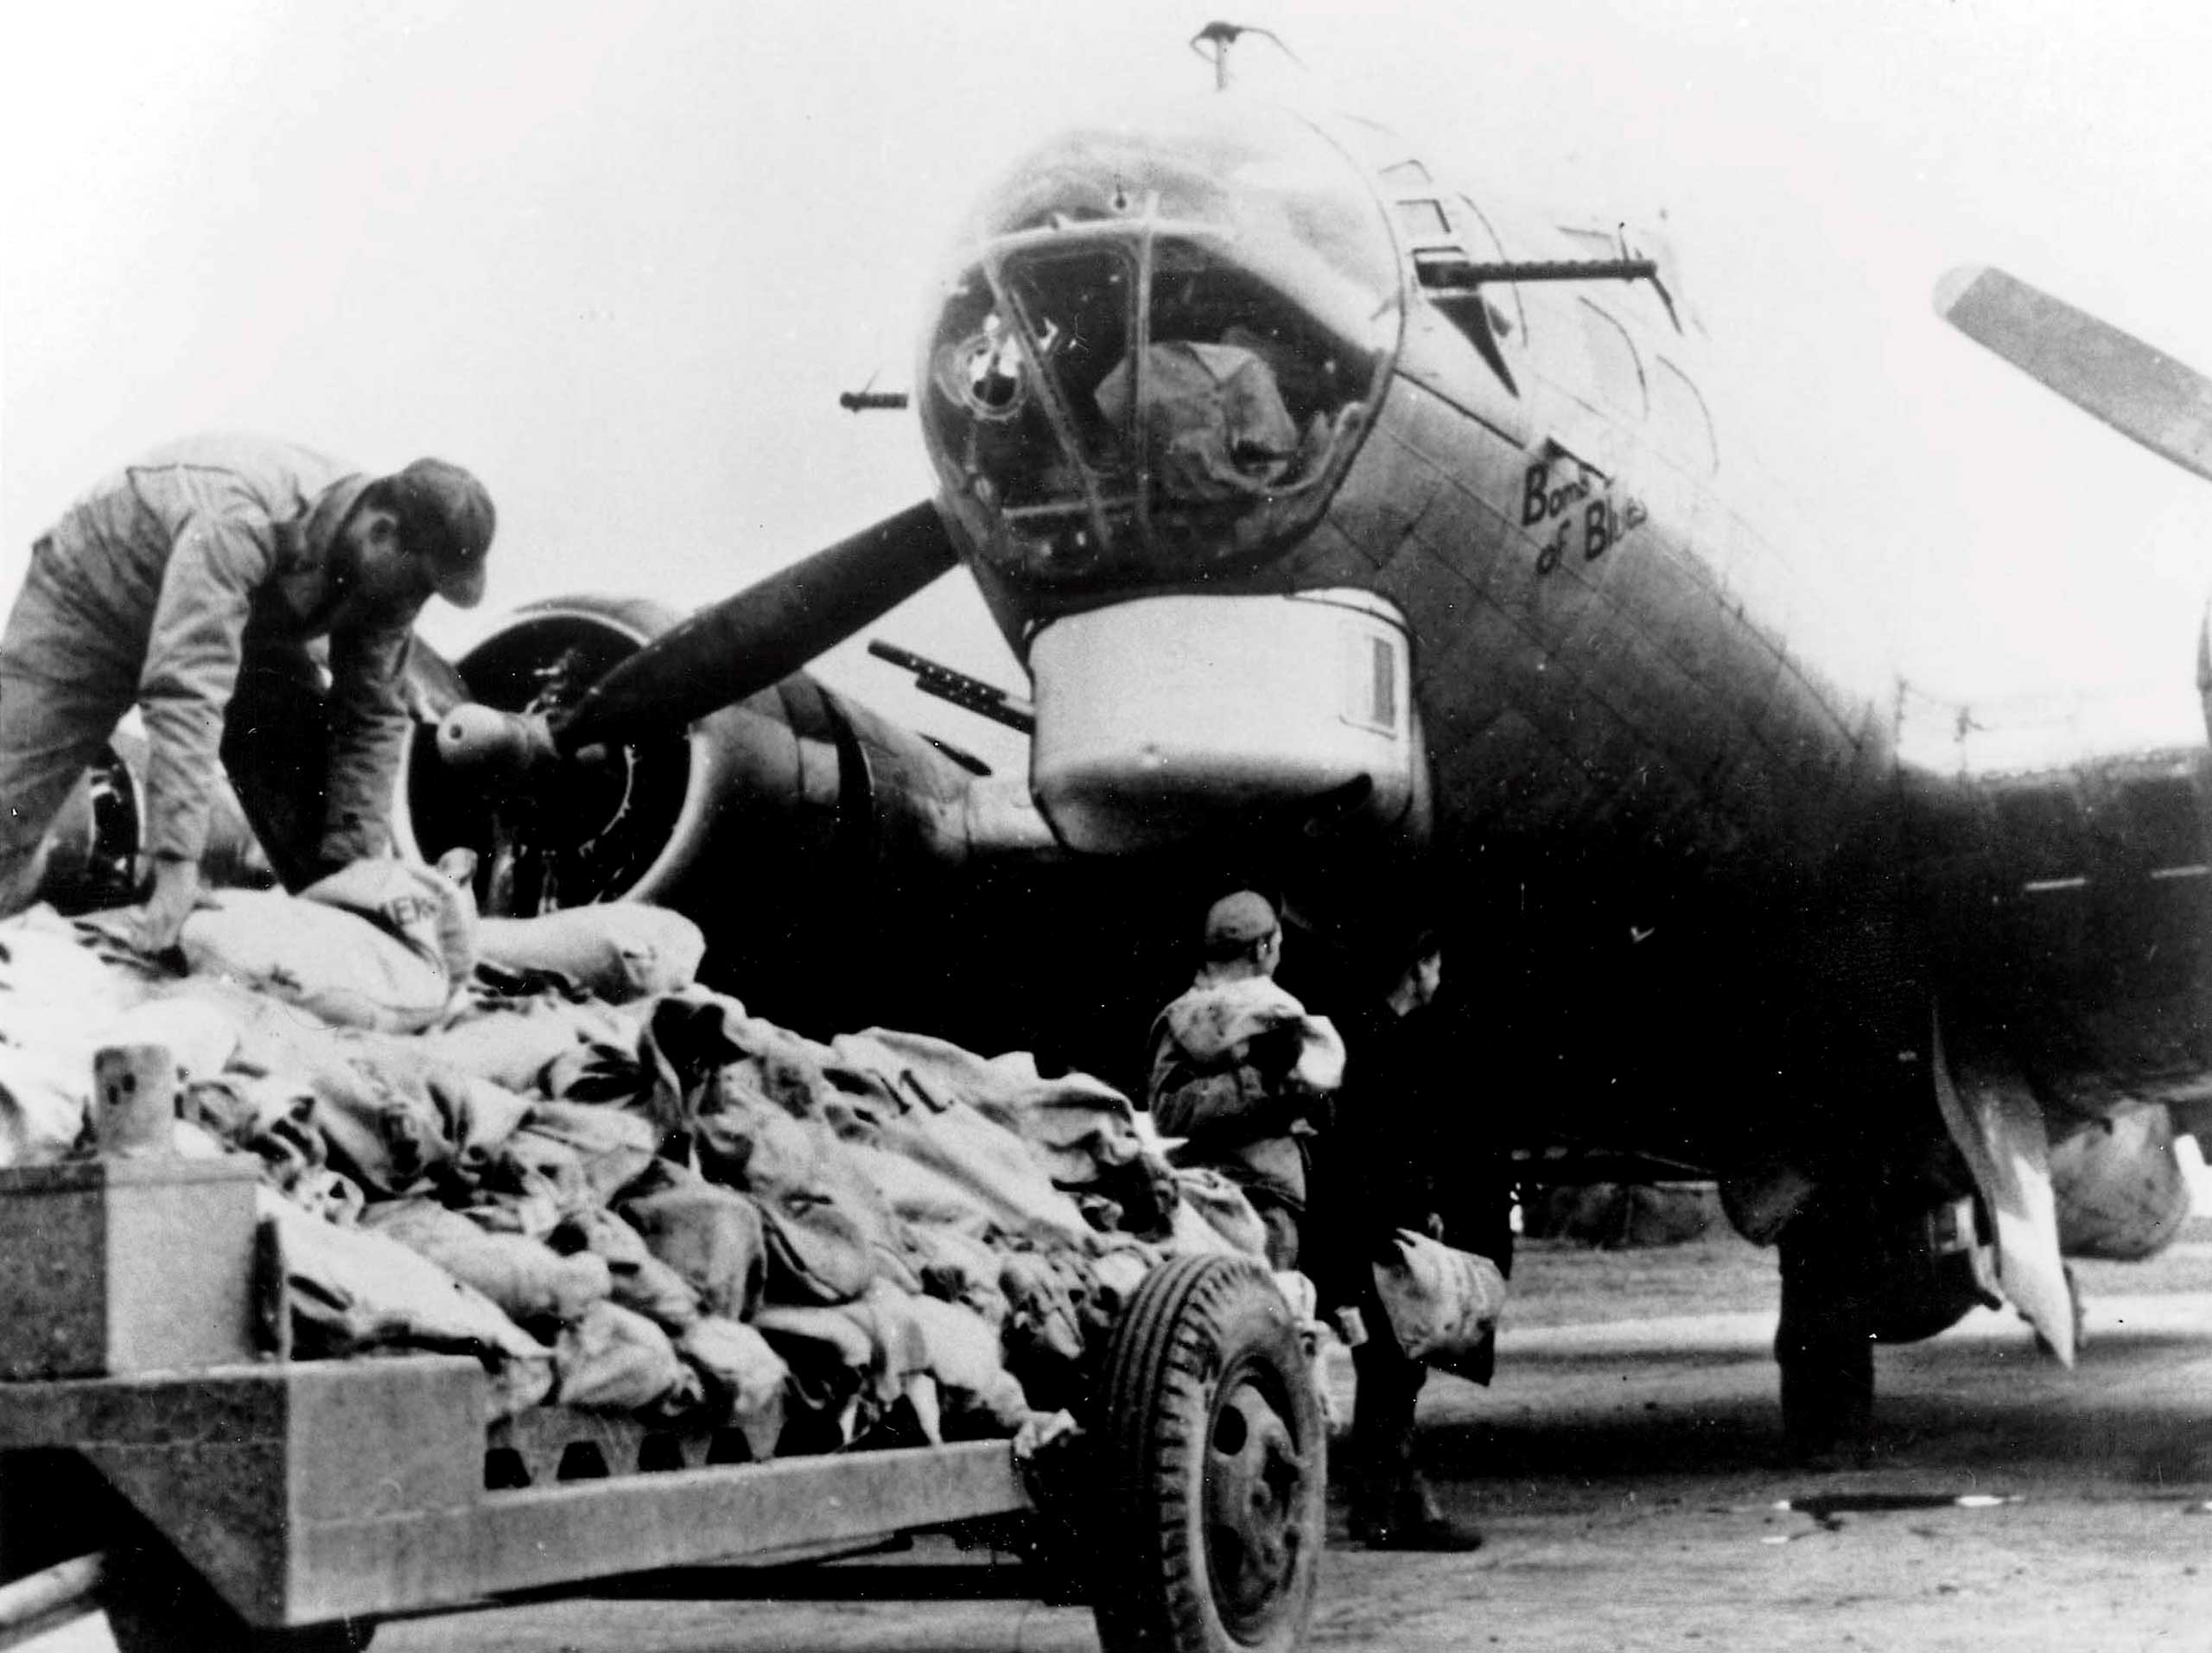 Workers load food onto an American B17 bomber during Operation Chowhound which involved dropping essential food supplies from bombers to the starving Dutch people at the end of WWII. (Imperial War Museum—Corbis)